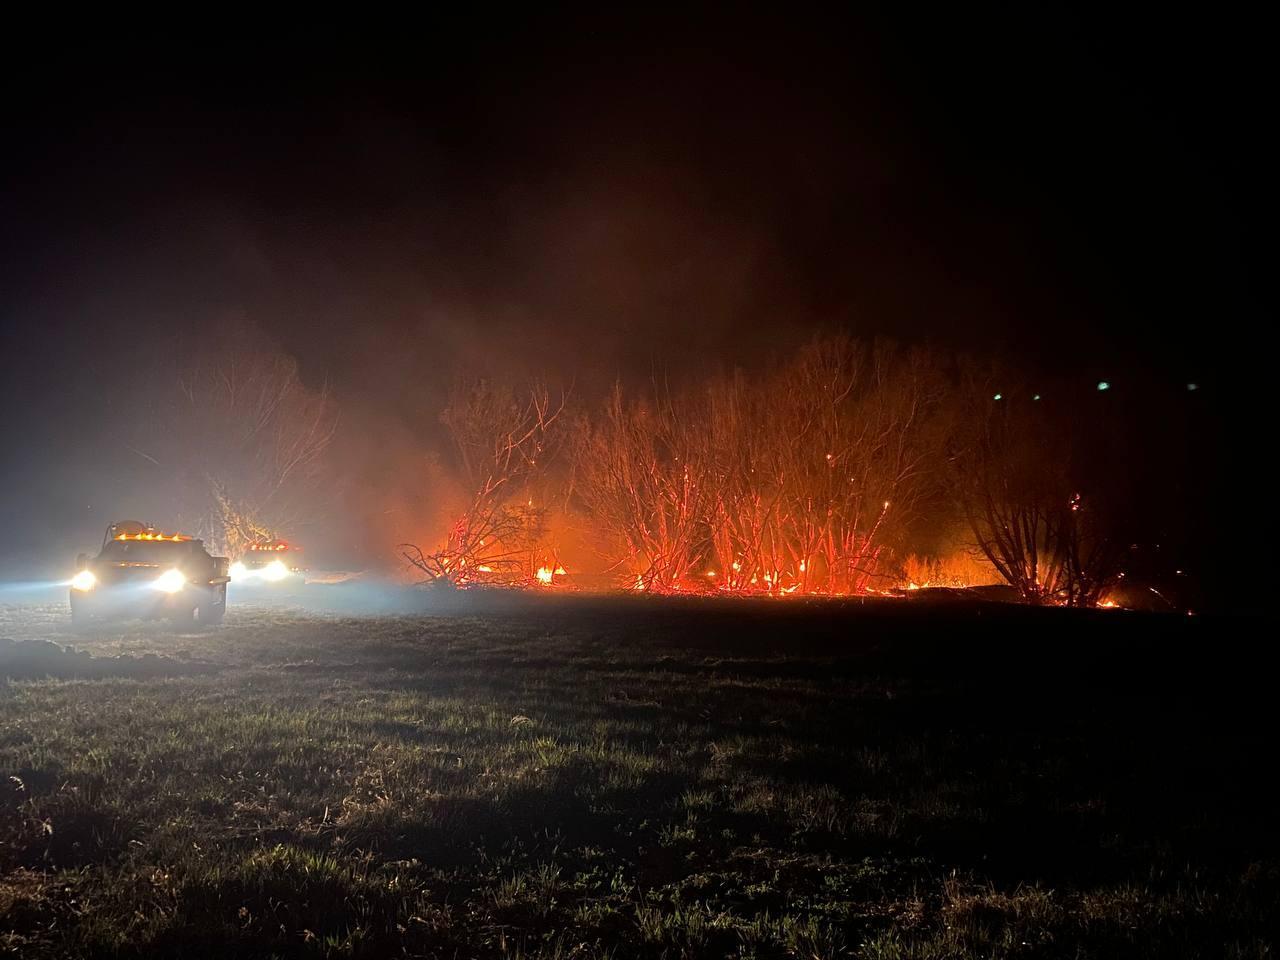 Dozers, crews, and engines responded to multiple spot fires near Holman during the night shift for May 8, 2022